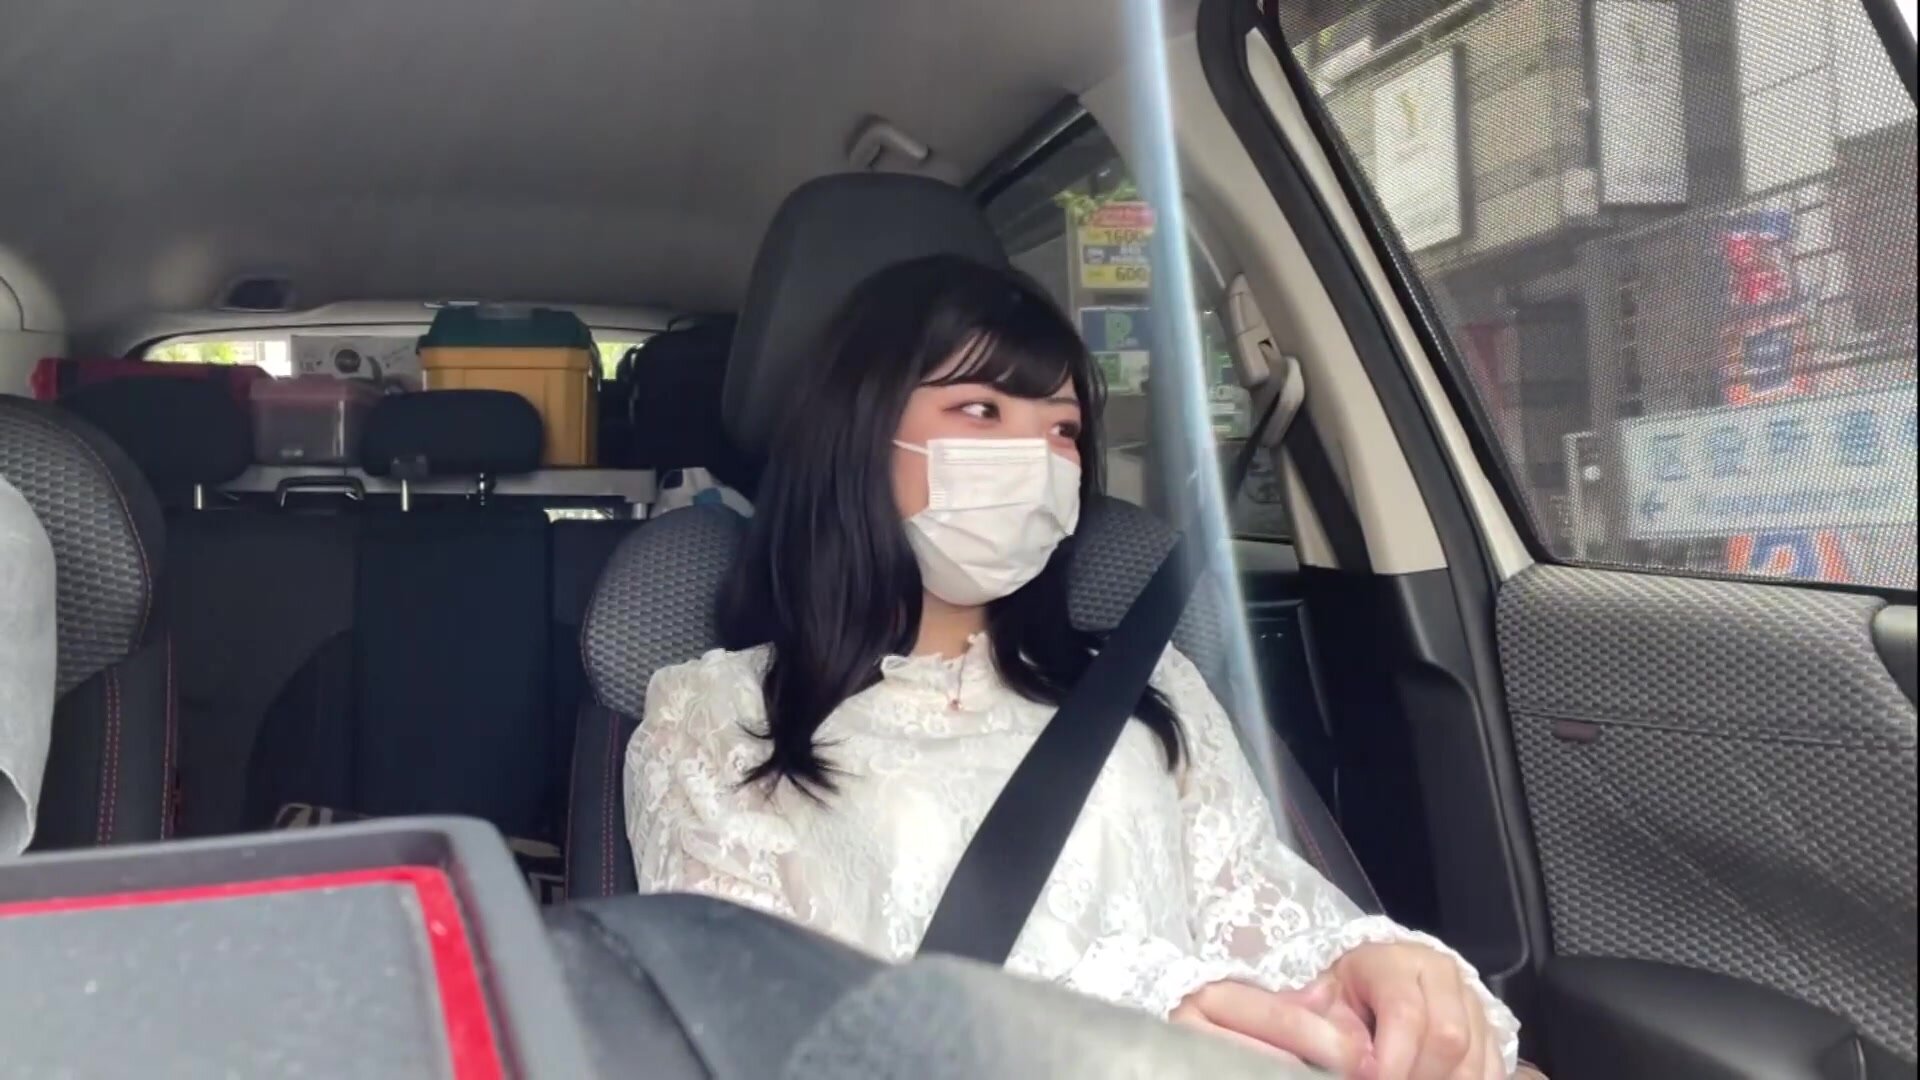 383NMCH-038 [Vlog] Gonzo video leaked with black-haired